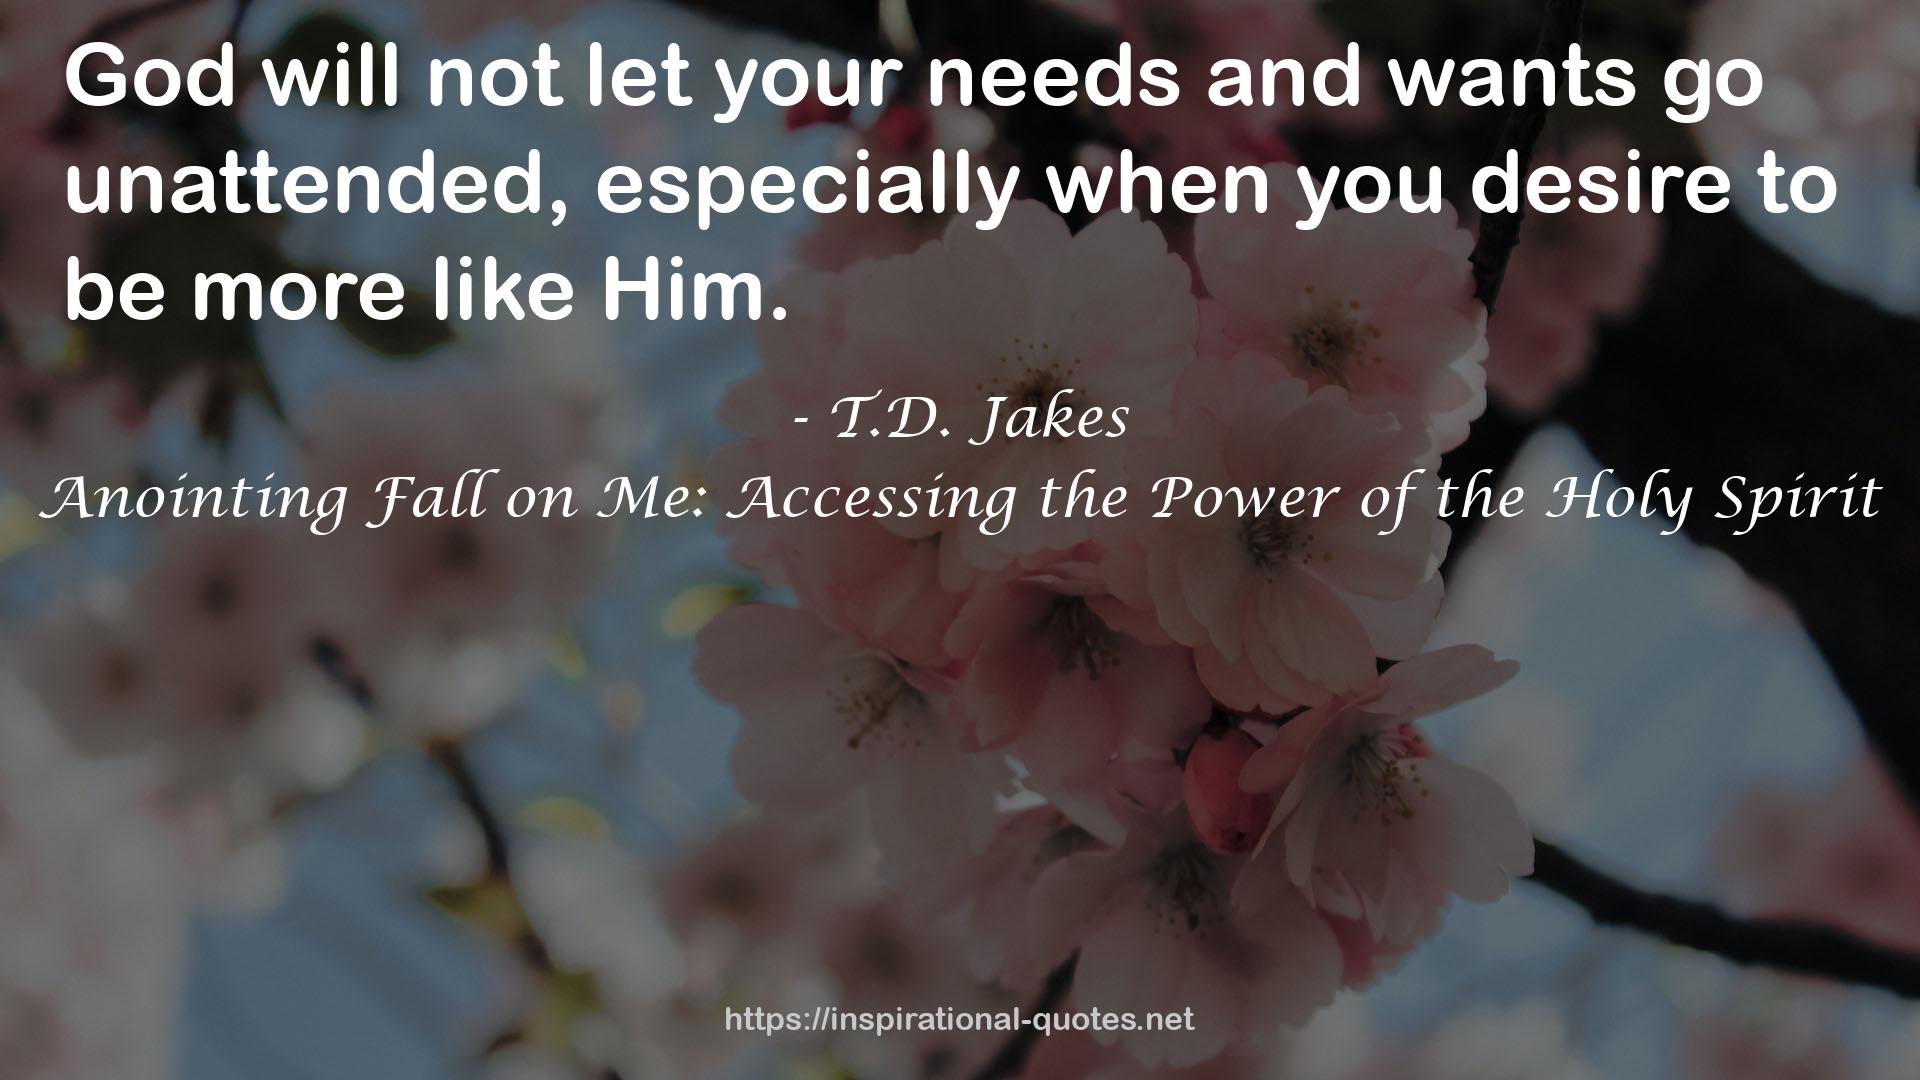 Anointing Fall on Me: Accessing the Power of the Holy Spirit QUOTES